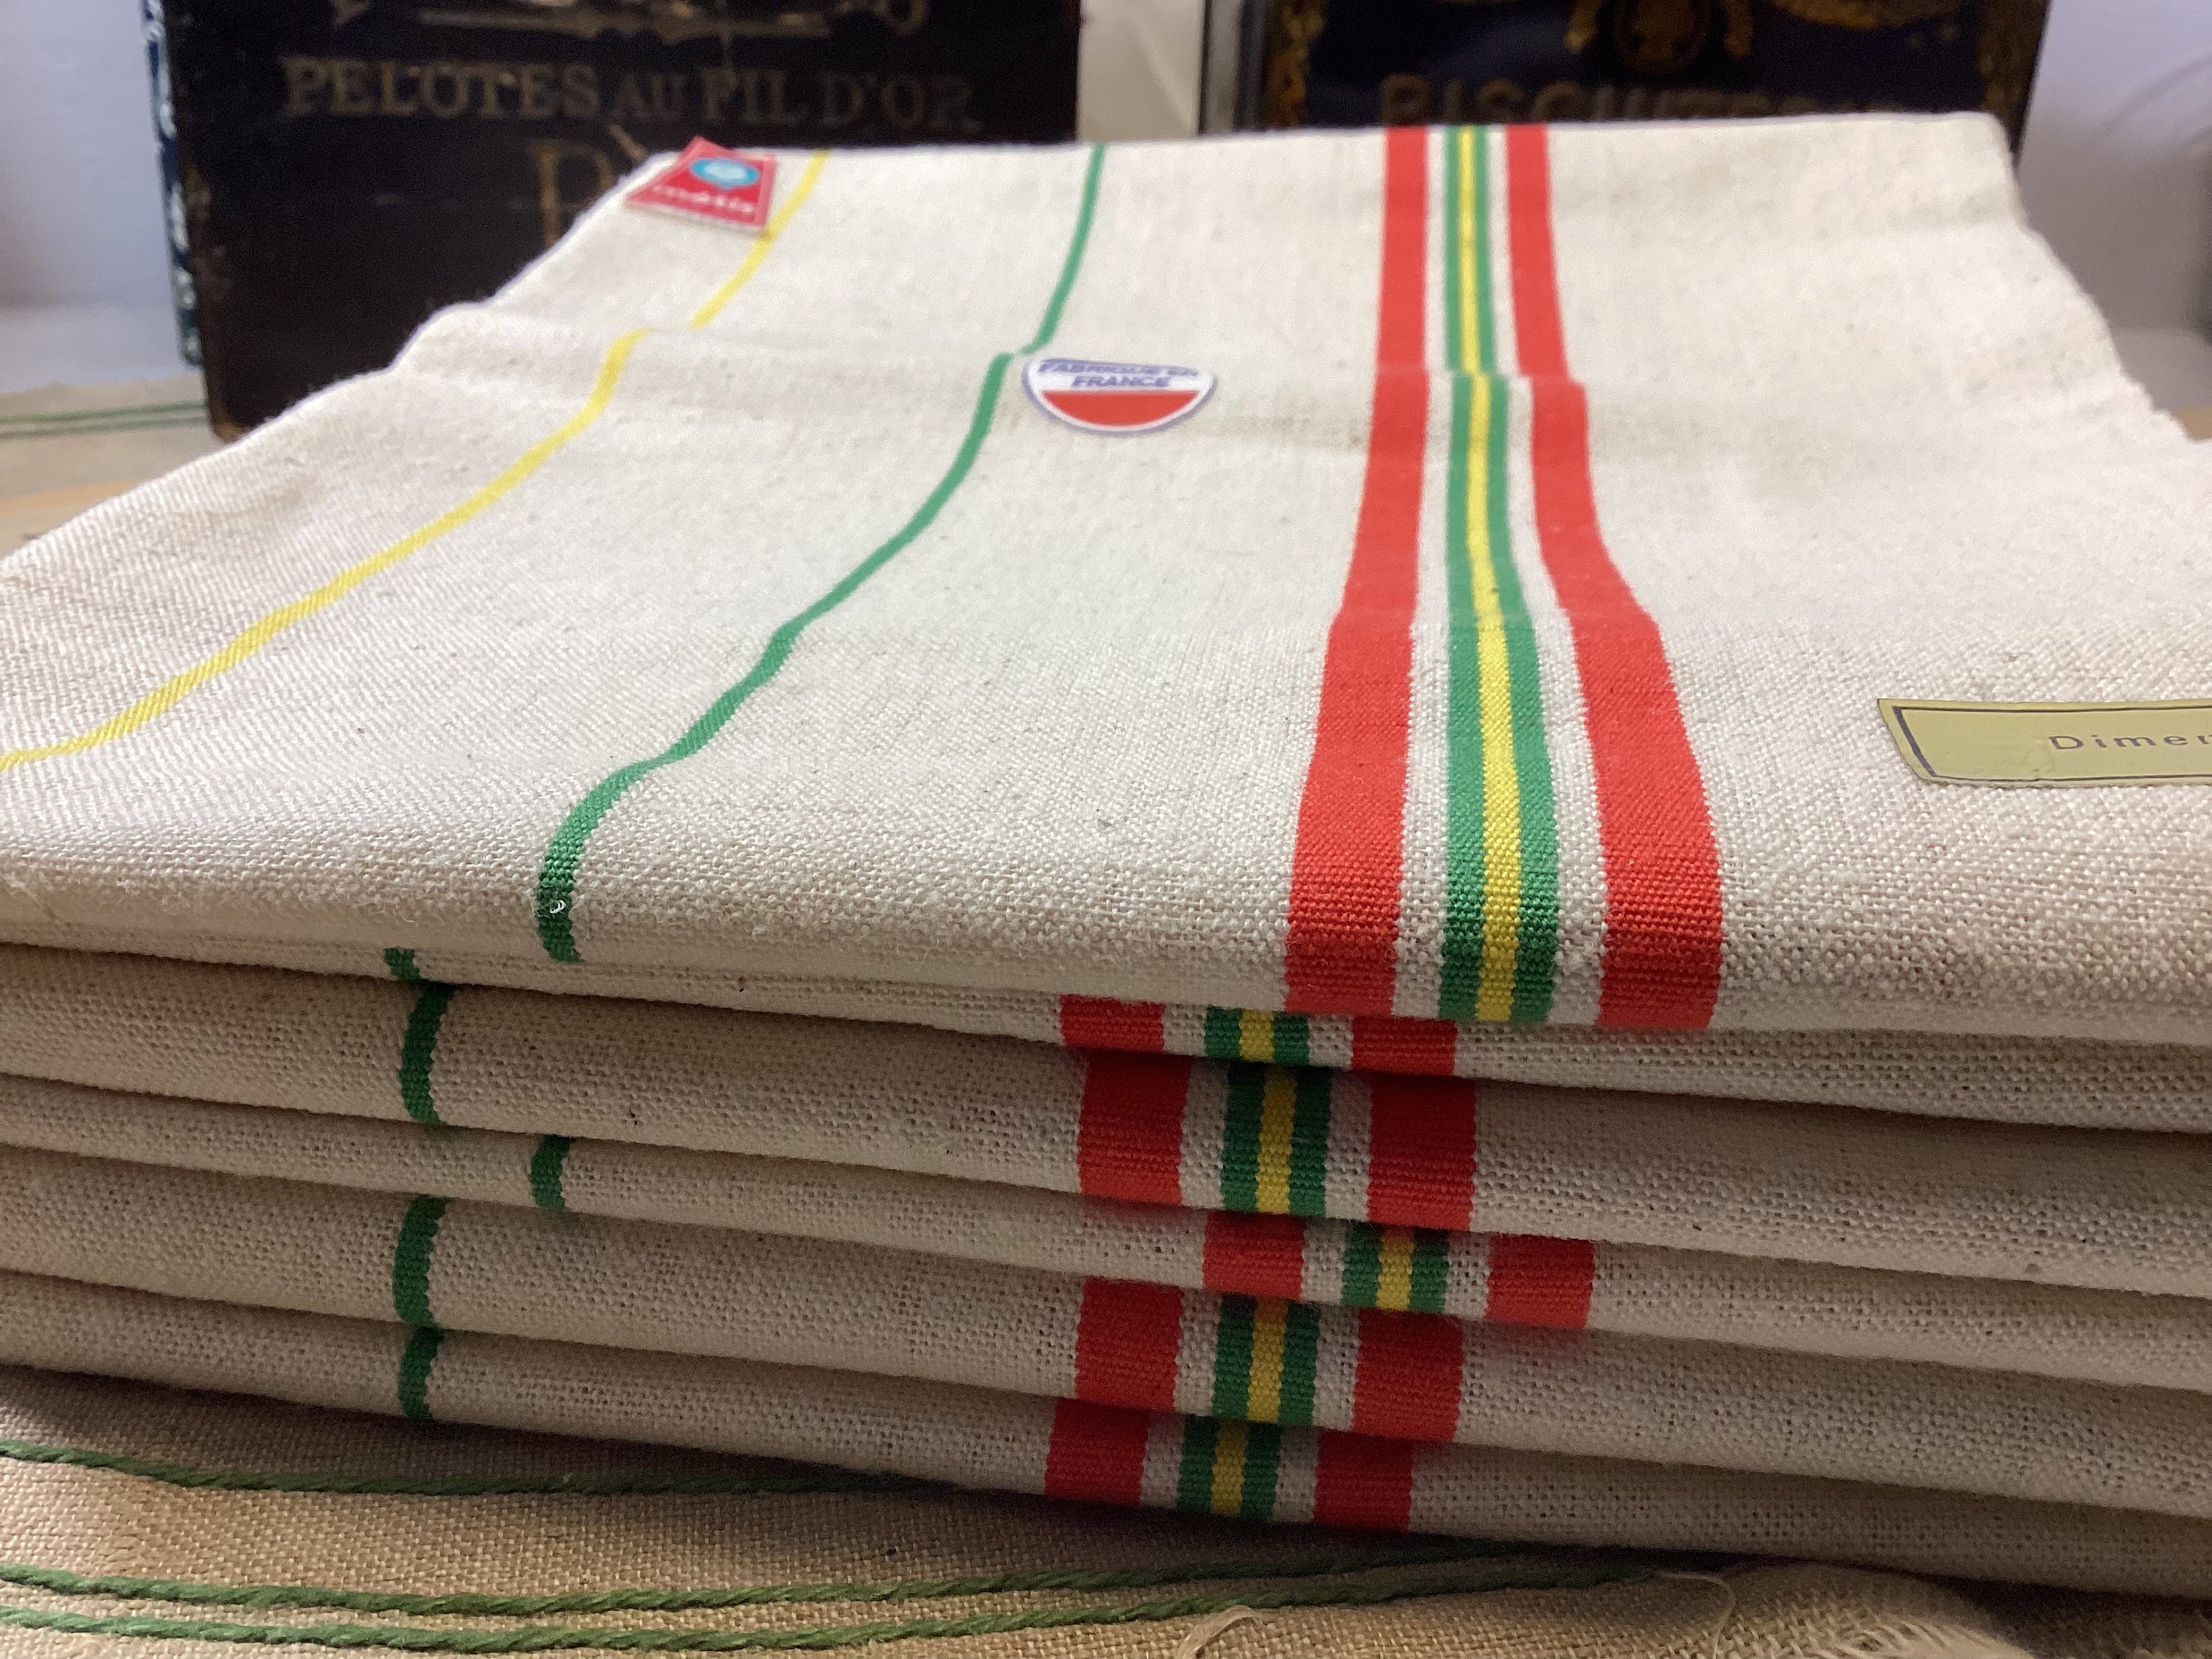 Christmas Hand Towels, Red Kitchen Towel, French Tea Towel 100% Pure Linen,  Bar Towels, Red Dishtowels, French Towels, Red Striped Dish Towels, Linen